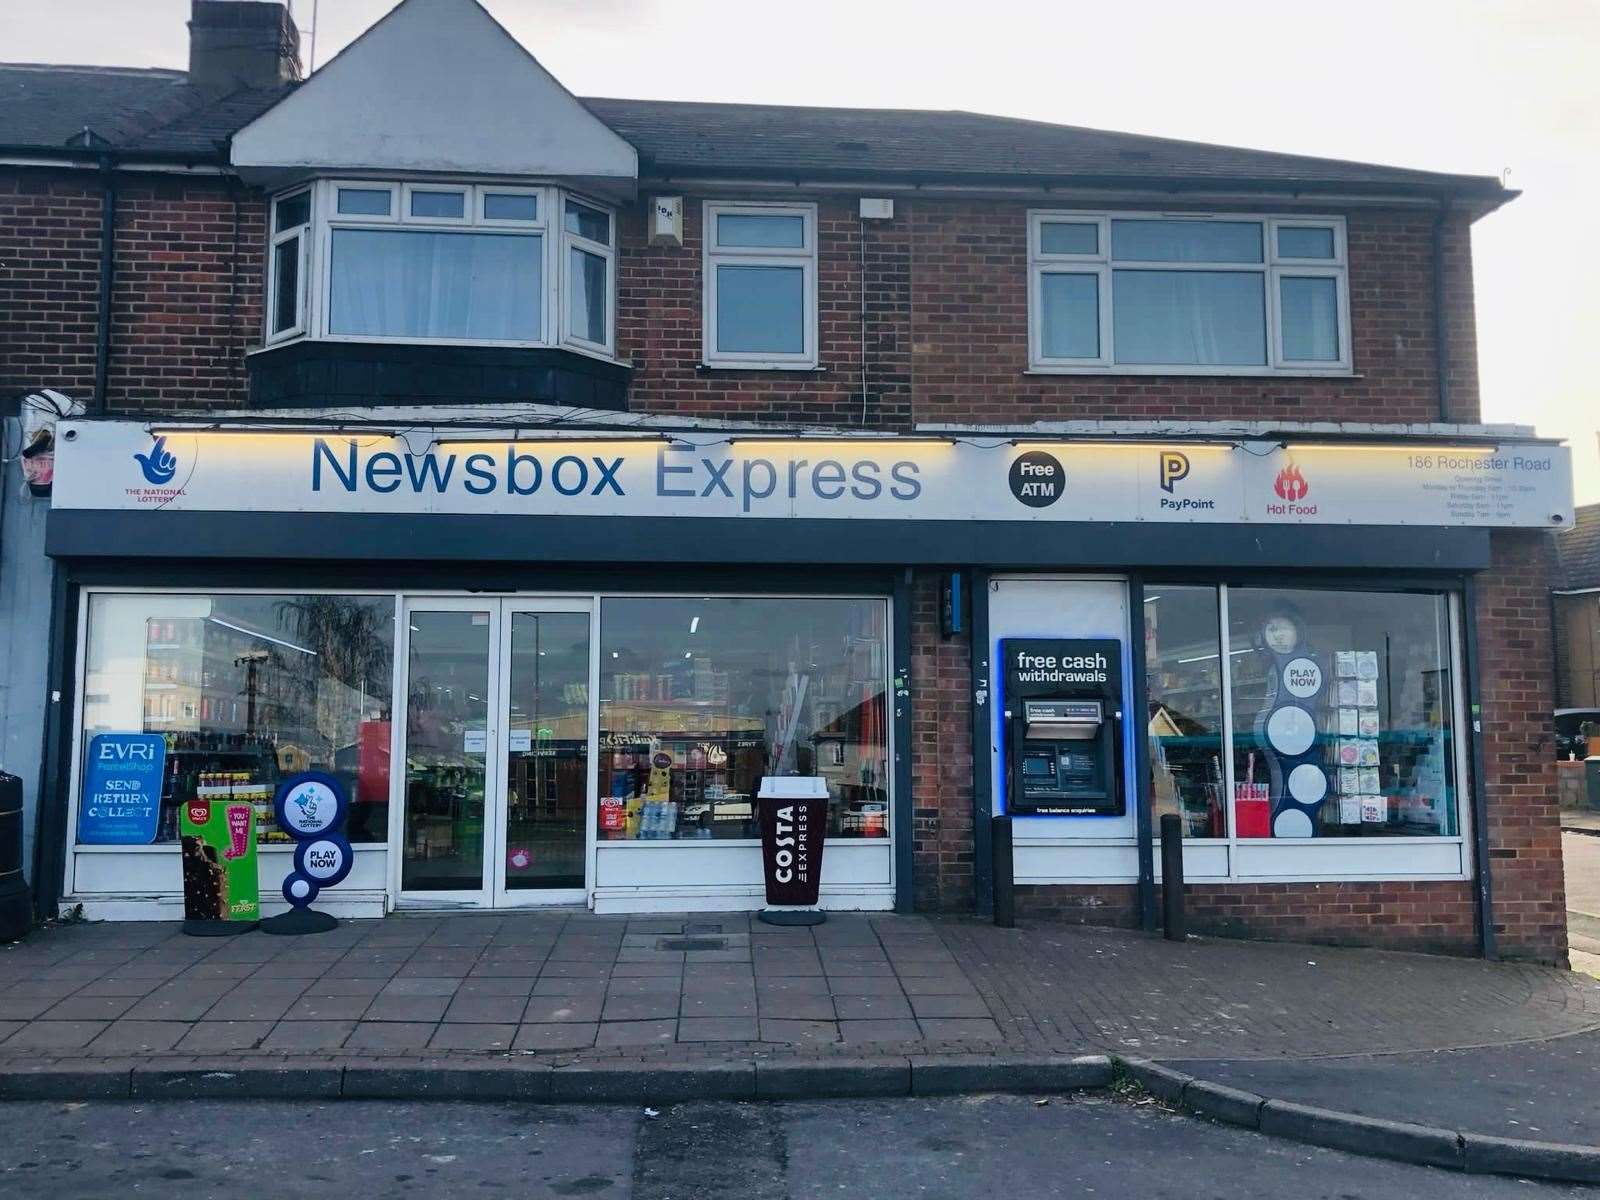 The Newsbox Express in Gravesend. Picture: Chelan Patel